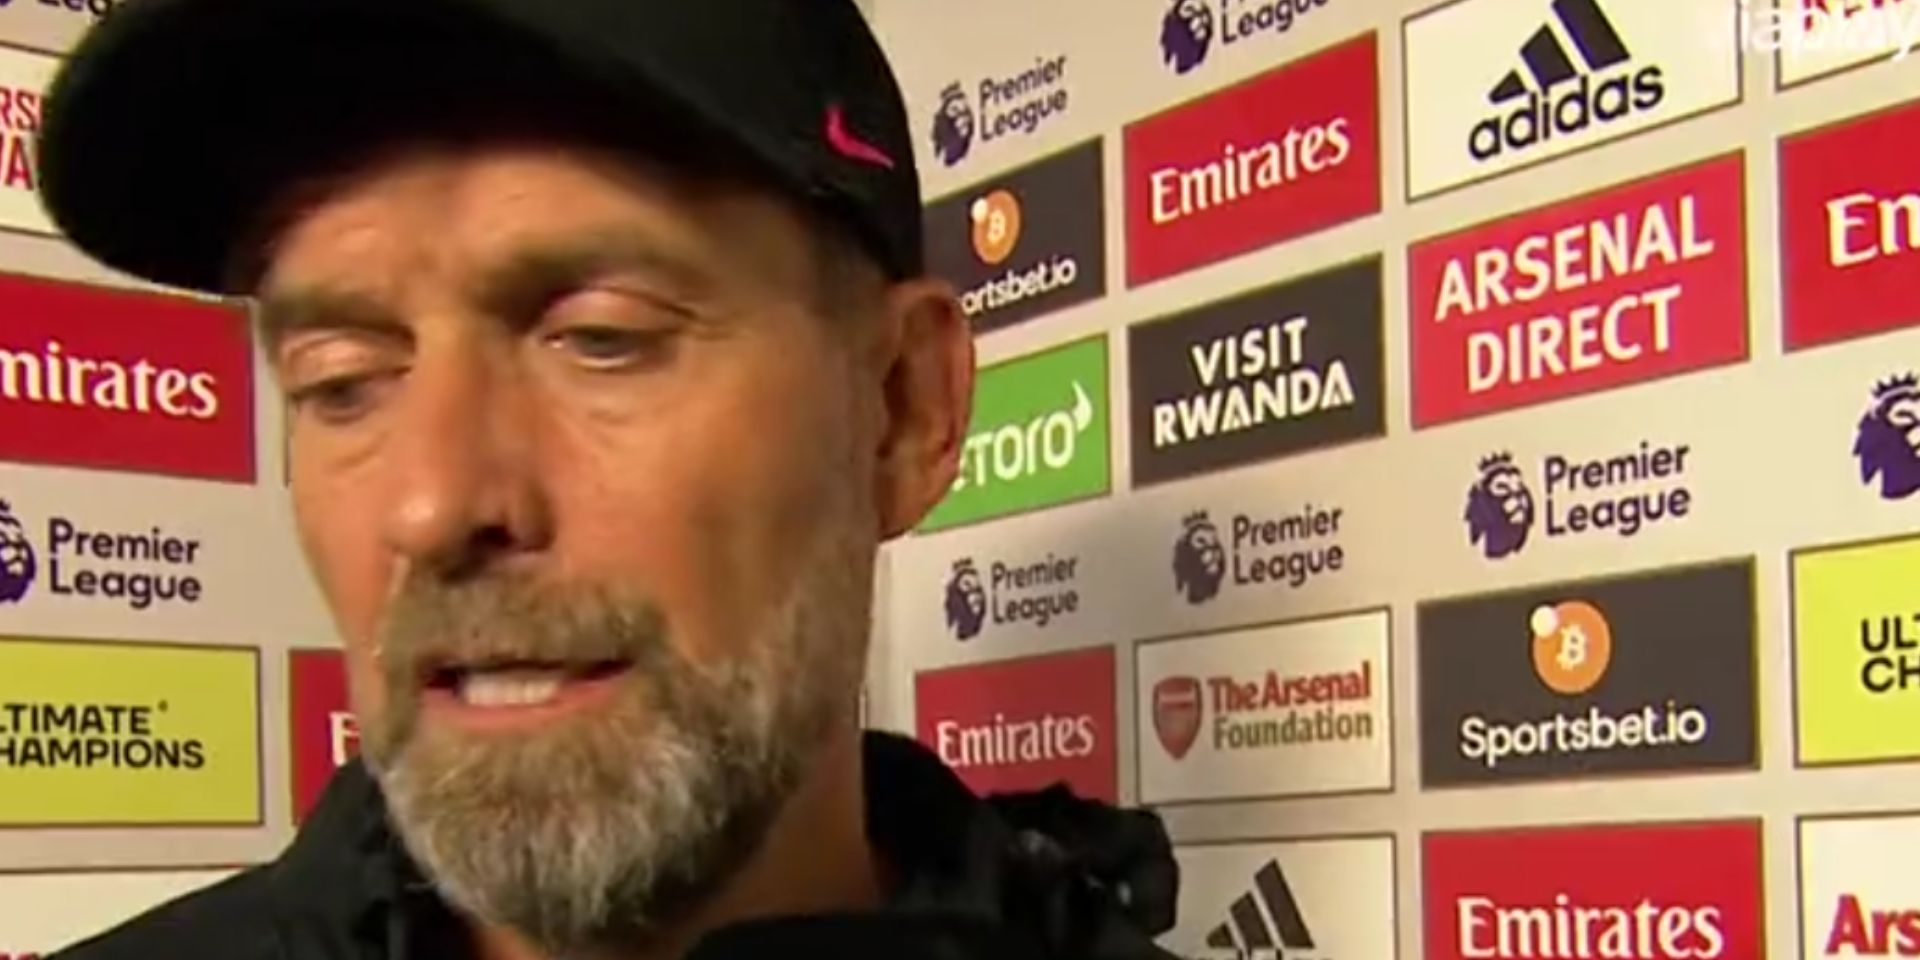 (Video) Jurgen Klopp looks visibly devastated with Liverpool’s loss against Arsenal